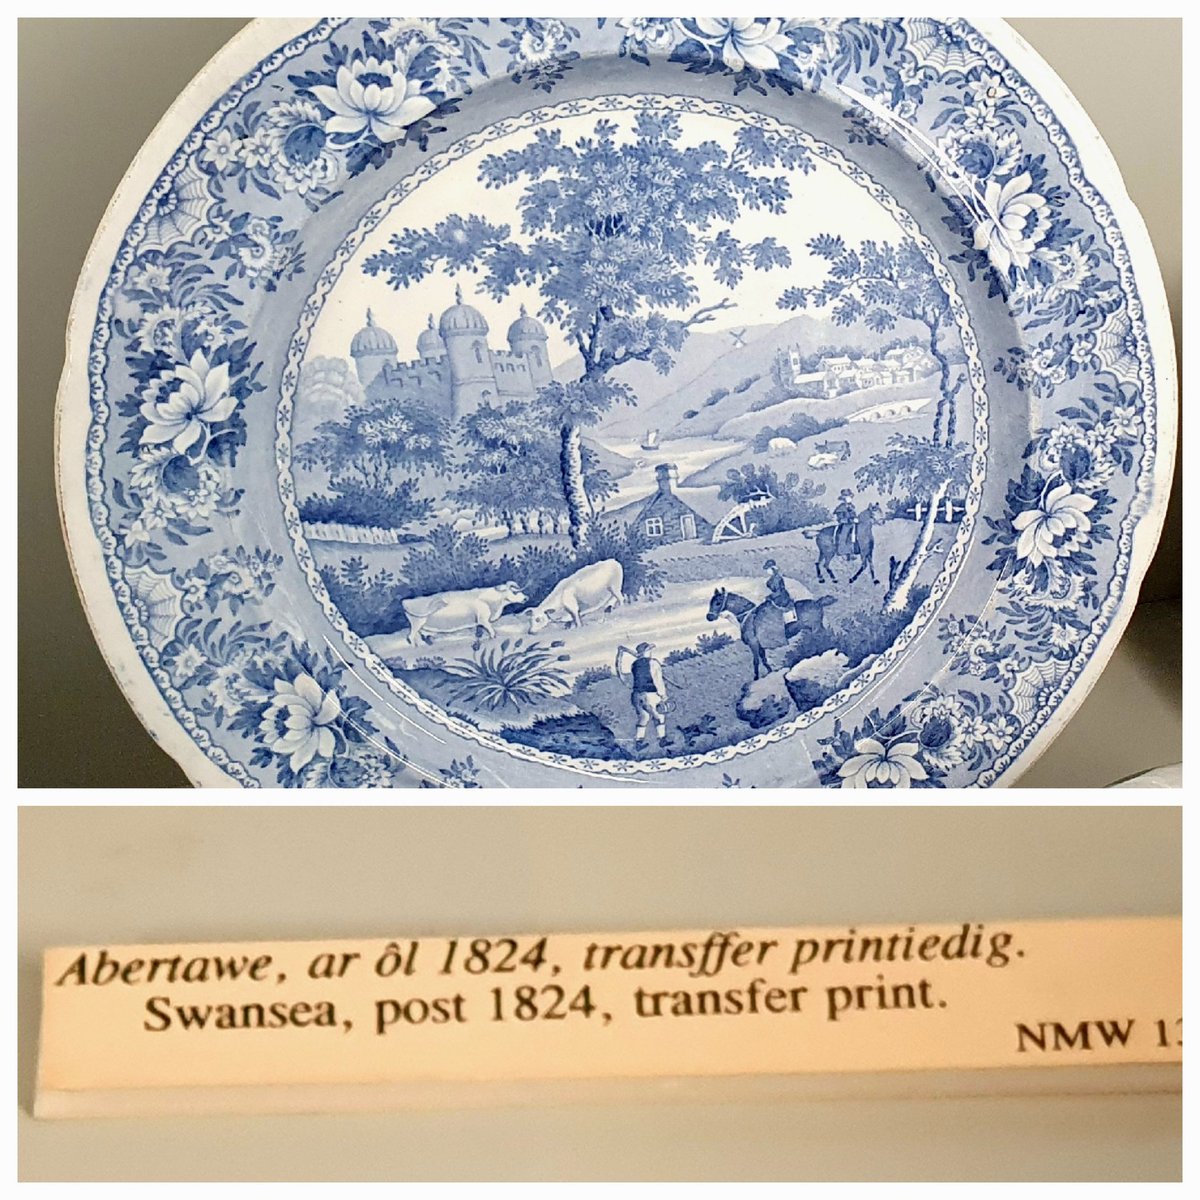 A shared heritage - found the 'Ladies of Llangollen' riding in the countryside hiding in plain sight in the @BangorUni #ceramics collection #transfer #collection #LGBTQ #IrelandWales #Kilkenny #Ireland #Wales #LGBTQHistoryMonth #IrishHistory #WelshHistory